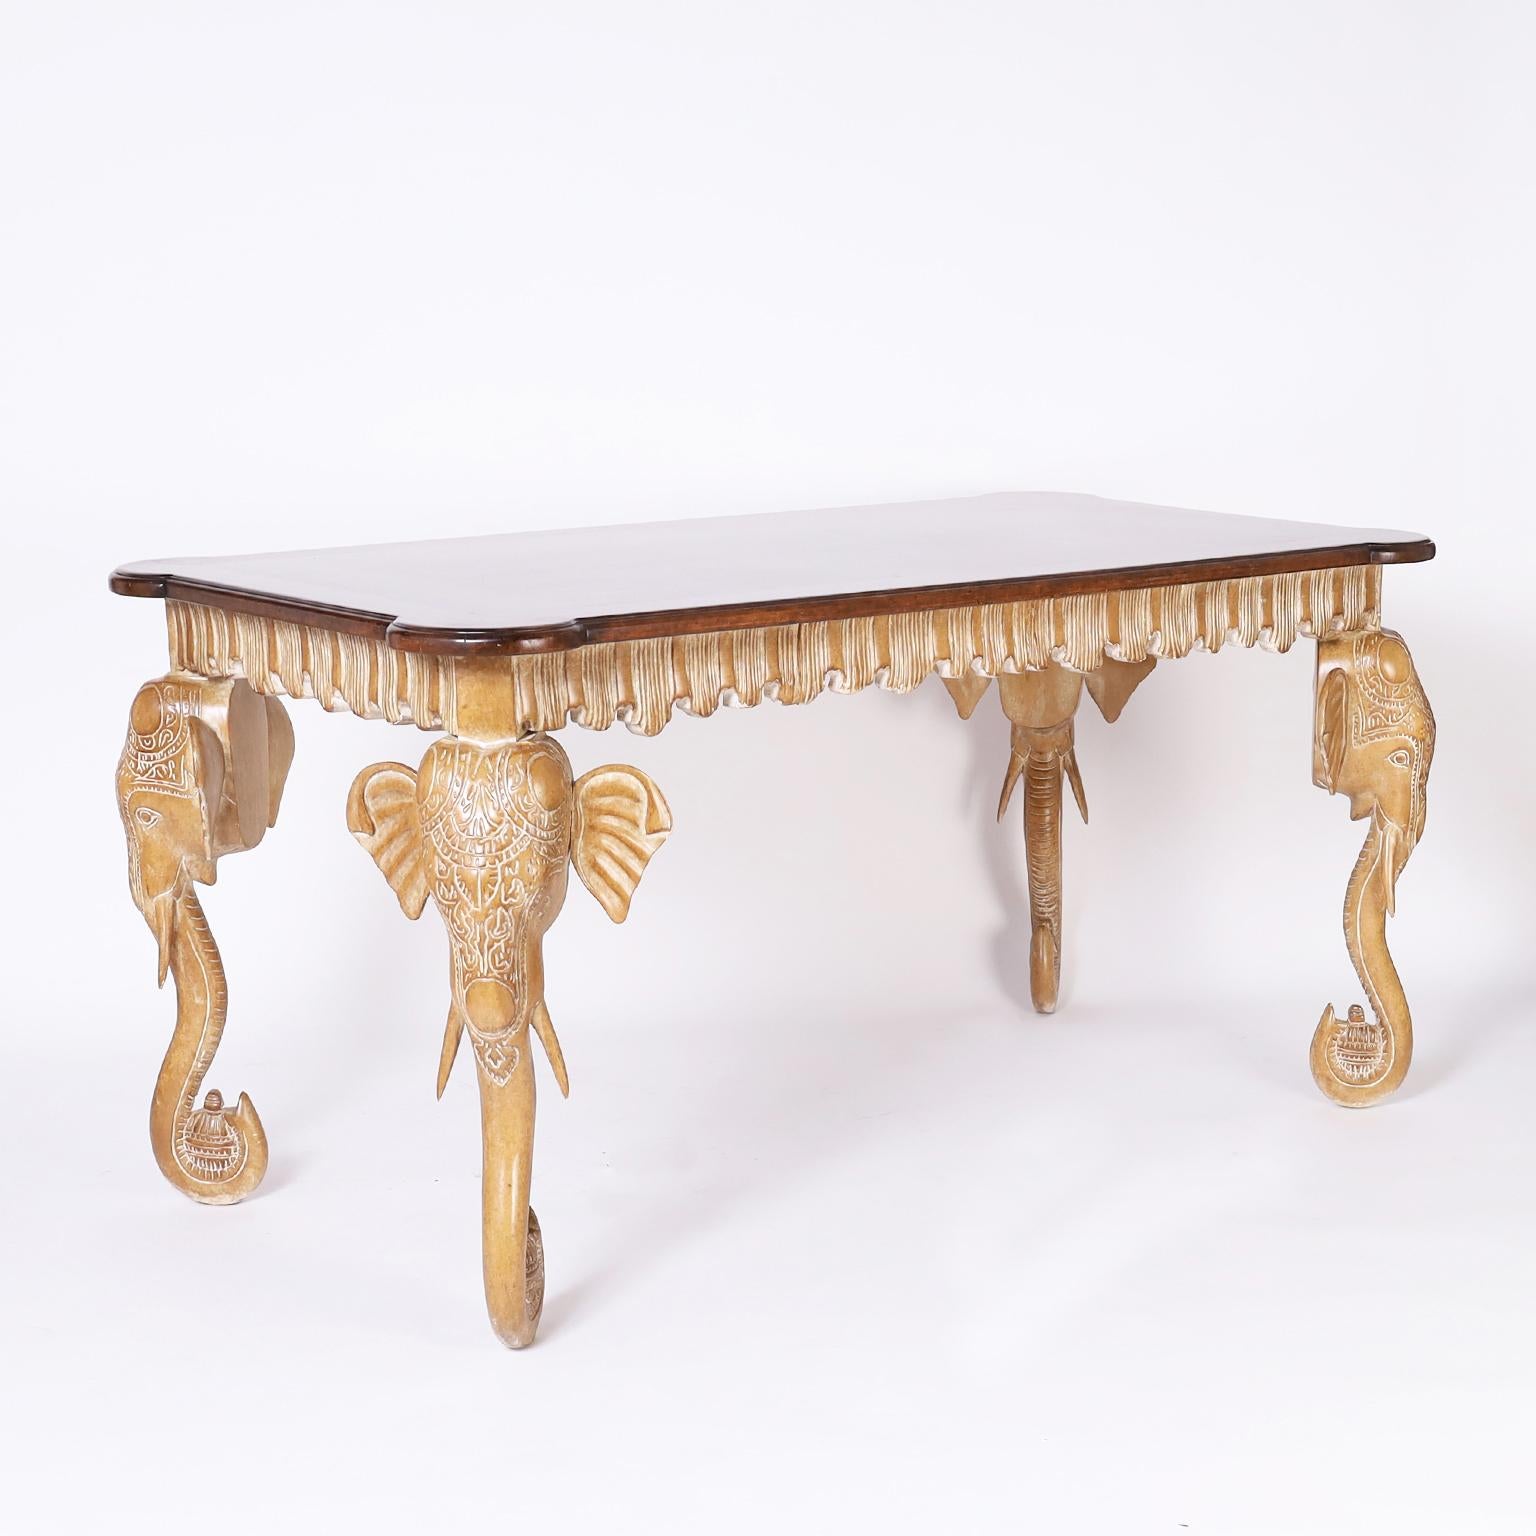 Mid century Italian one drawer writing table with a walnut top having a decorative beveled edge on a pickled or white washed bleached walnut base with a pleated apron and carved elephant head legs.